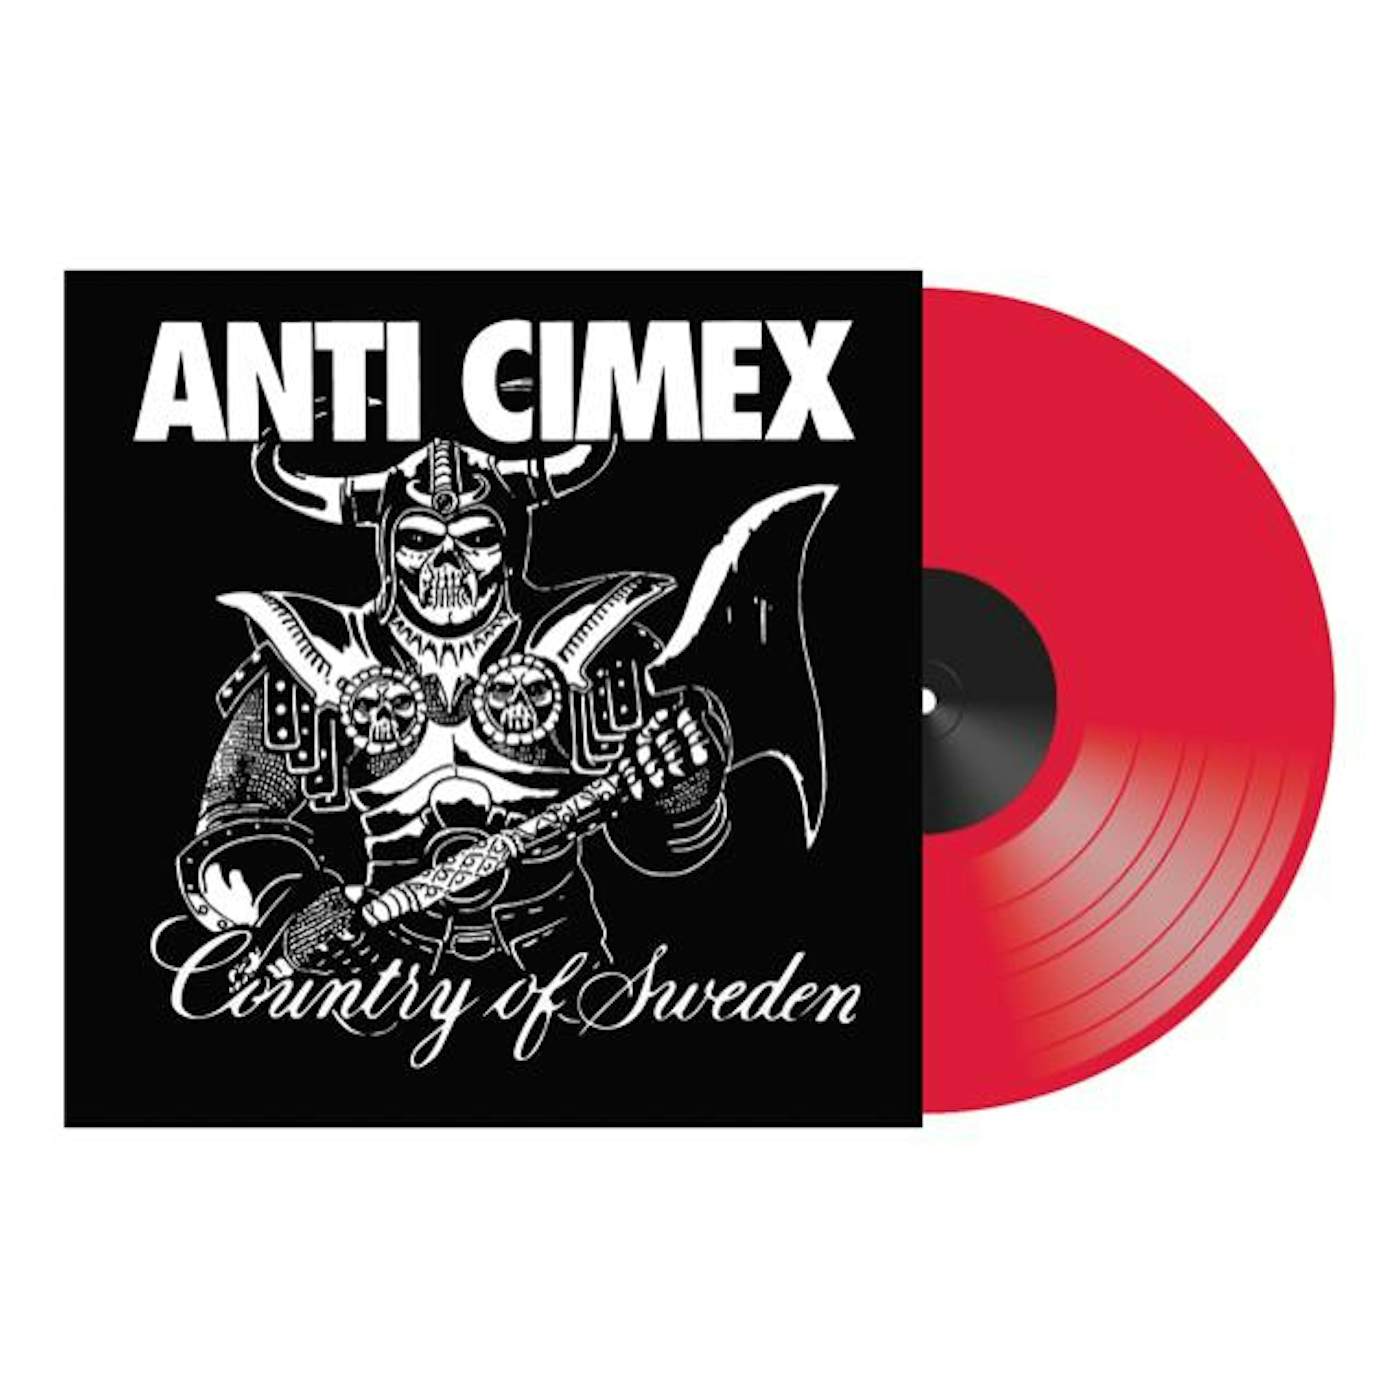 Anti Cimex ABSOLUTE: COUNTRY OF SWEDEN Vinyl Record